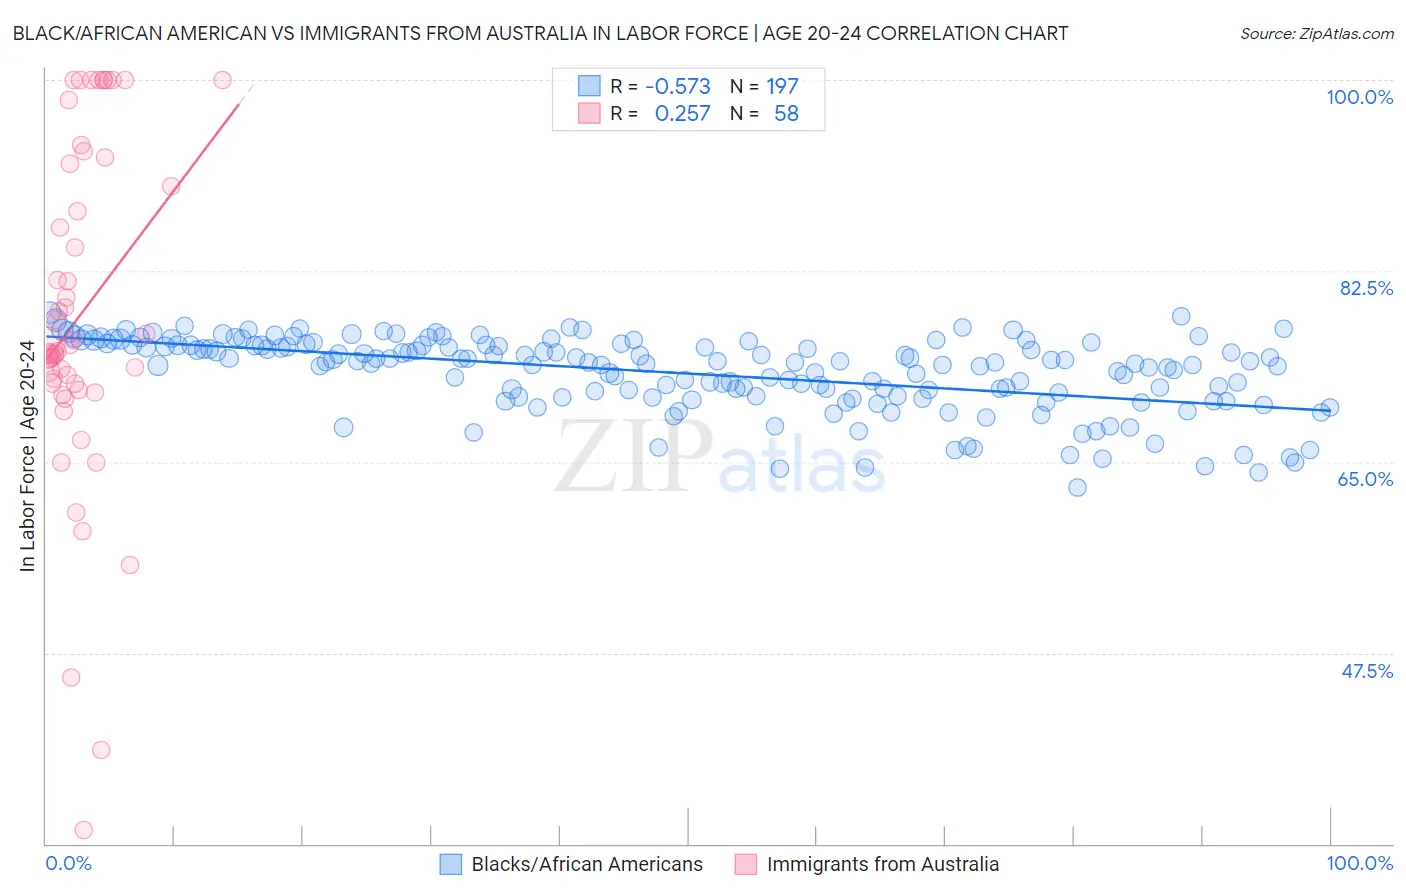 Black/African American vs Immigrants from Australia In Labor Force | Age 20-24